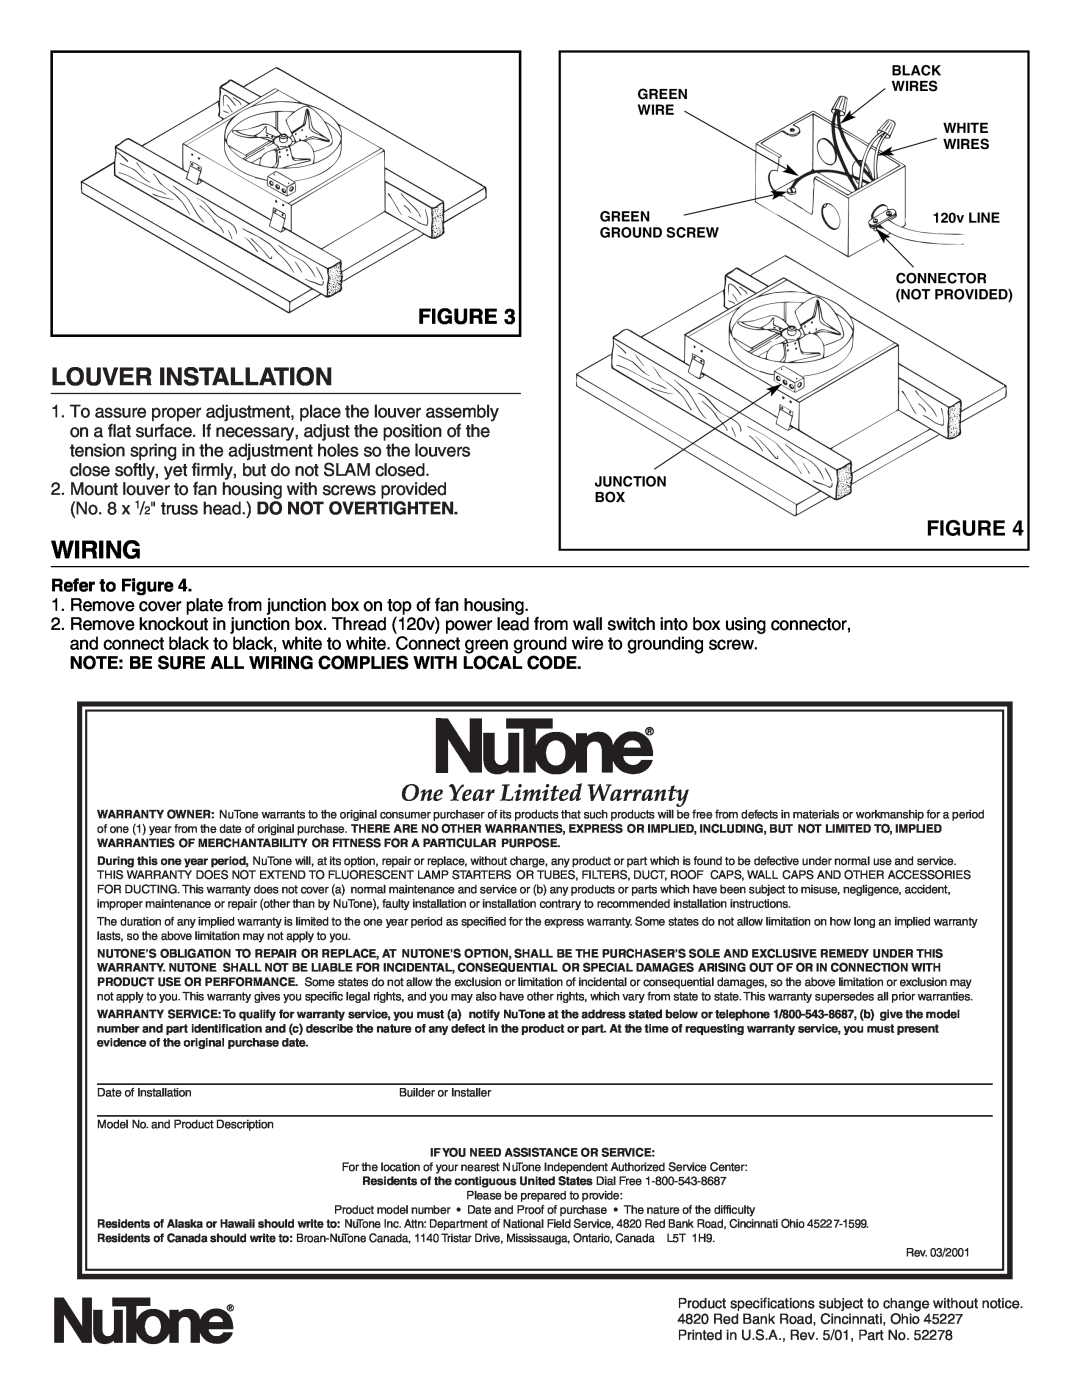 NuTone WHV-20 installation instructions Louver Installation, Wiring, One Year Limited Warranty, Figure 